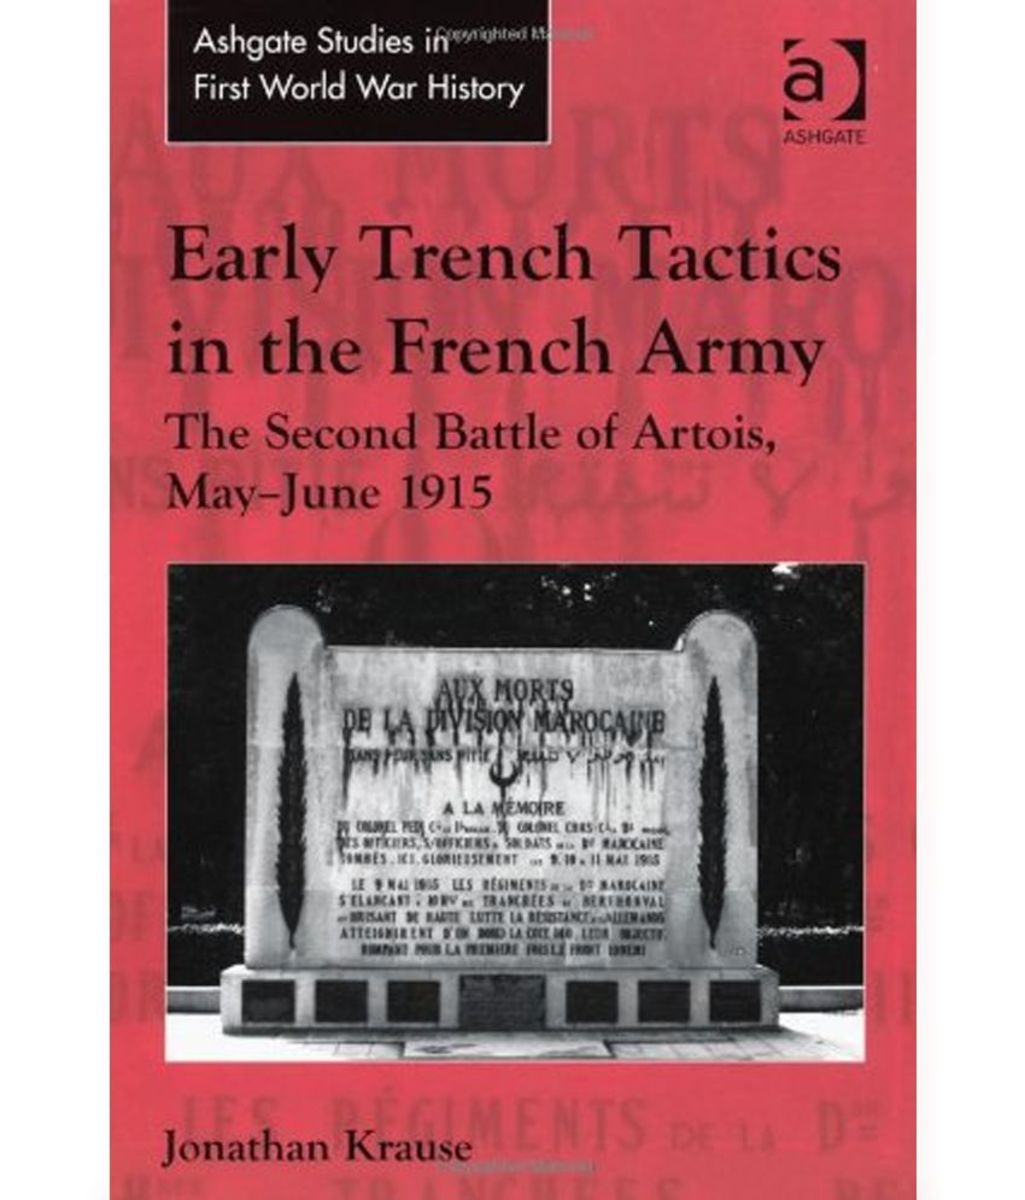 Early Trench Tactics in the French Army Review